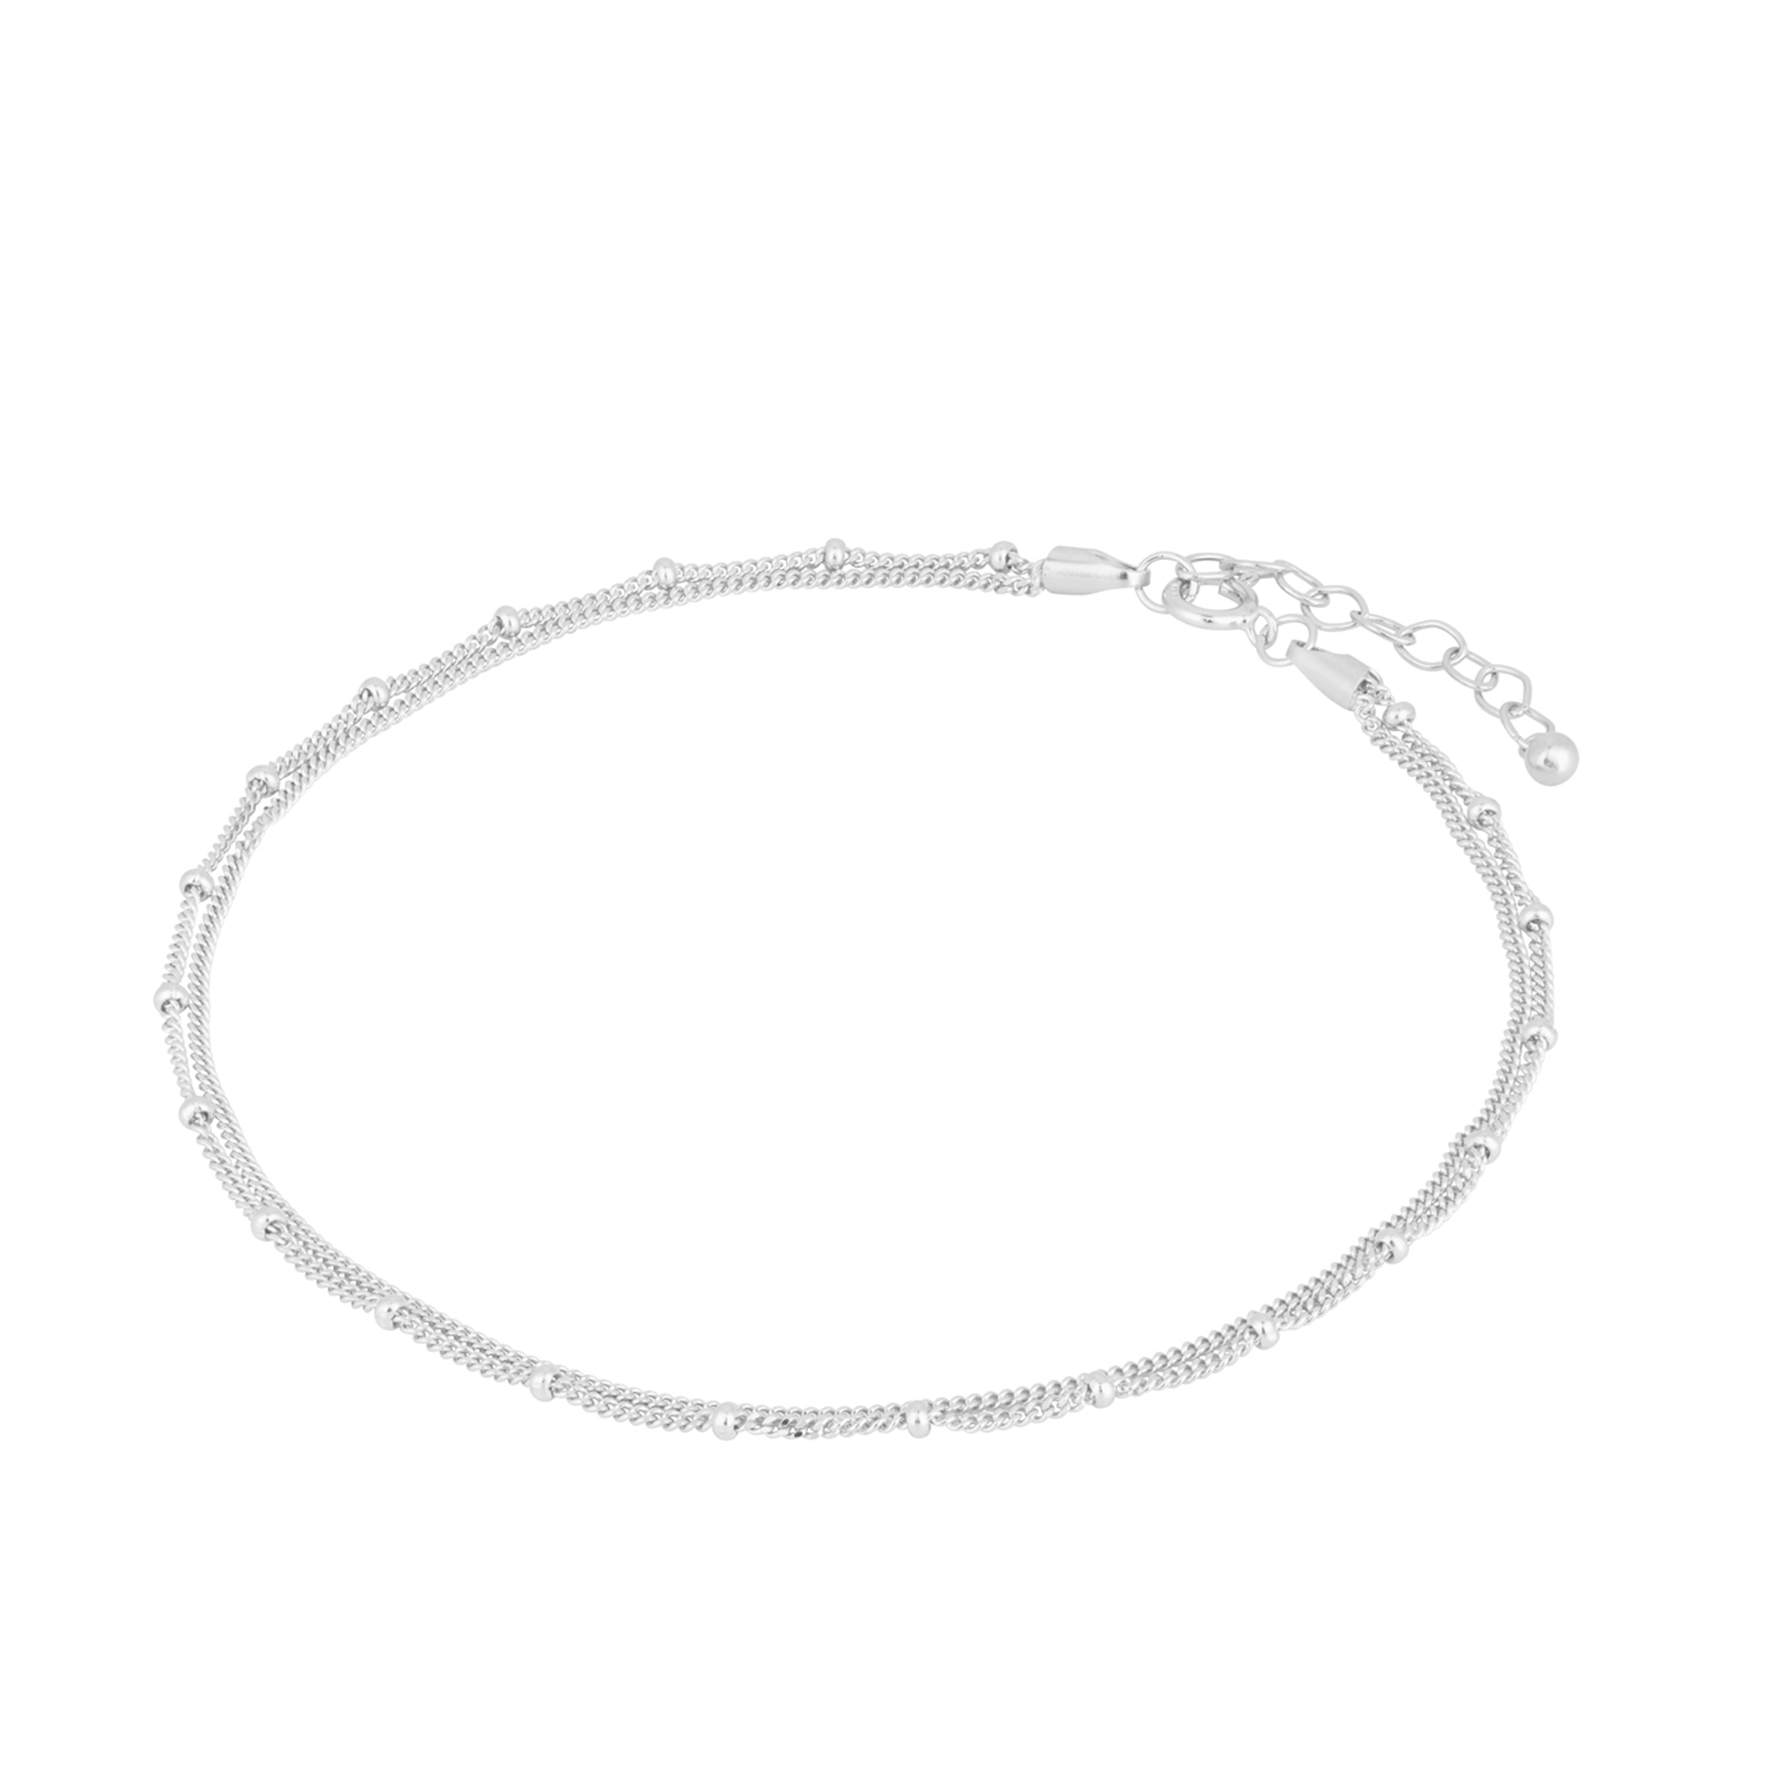 Galaxy Anklet von Pernille Corydon in Silber Sterling 925